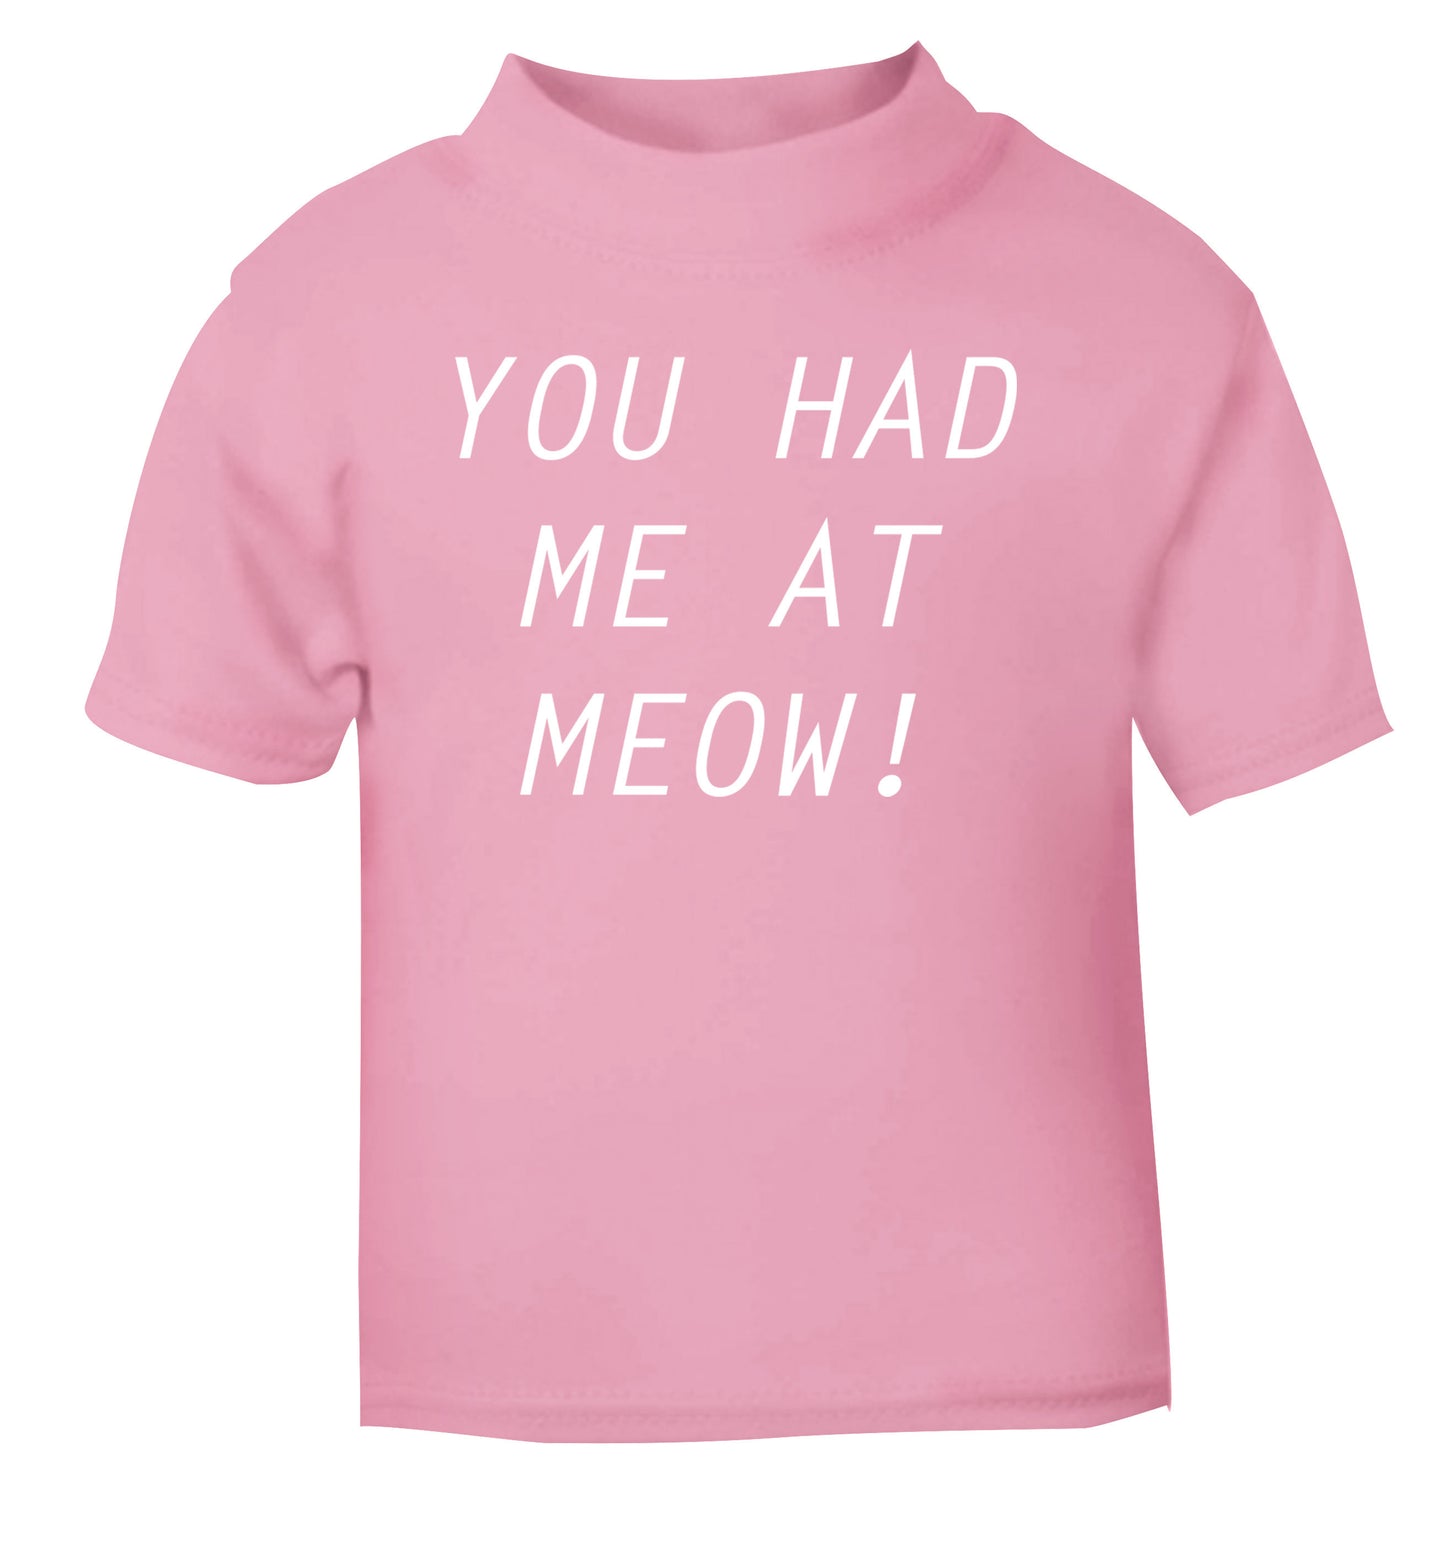 You had me at meow light pink Baby Toddler Tshirt 2 Years